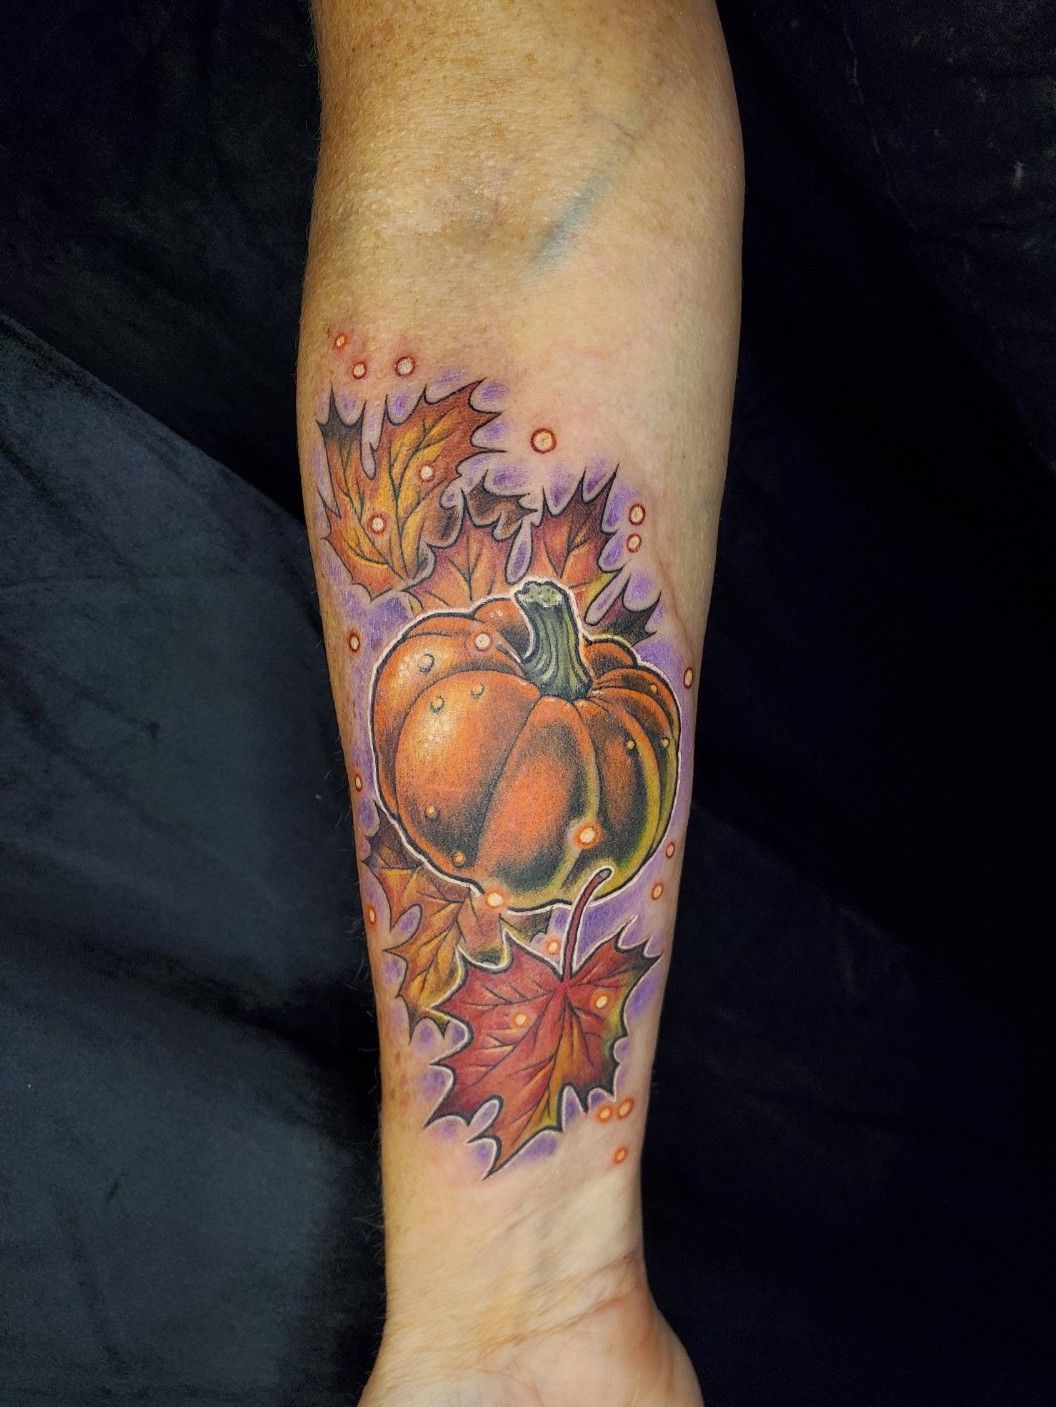 Reno Tattoo on Instagram  lemon tattoo all healed up by jordantattoo  Getting tattooed in that spot will make your face look like you just bit  into a big ole